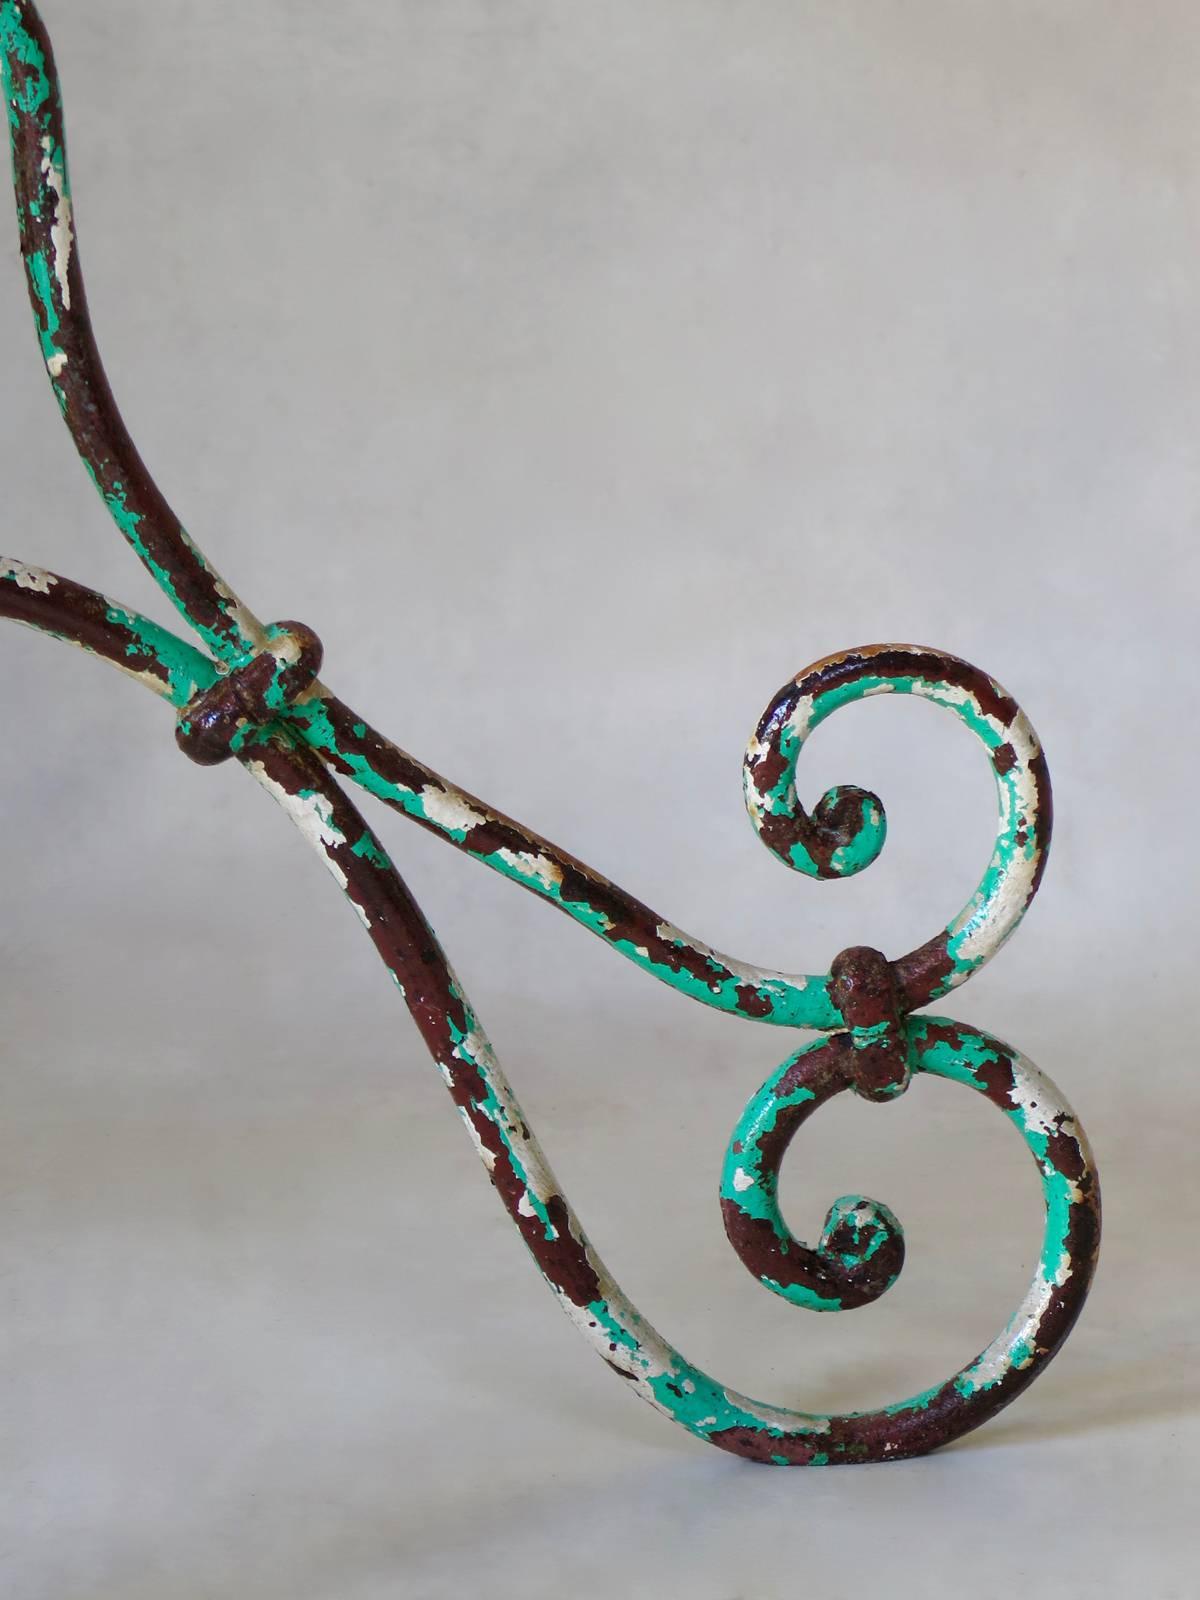 Painted Wrought Iron and Marble Gueridon Table, France, circa 1920s For Sale 3